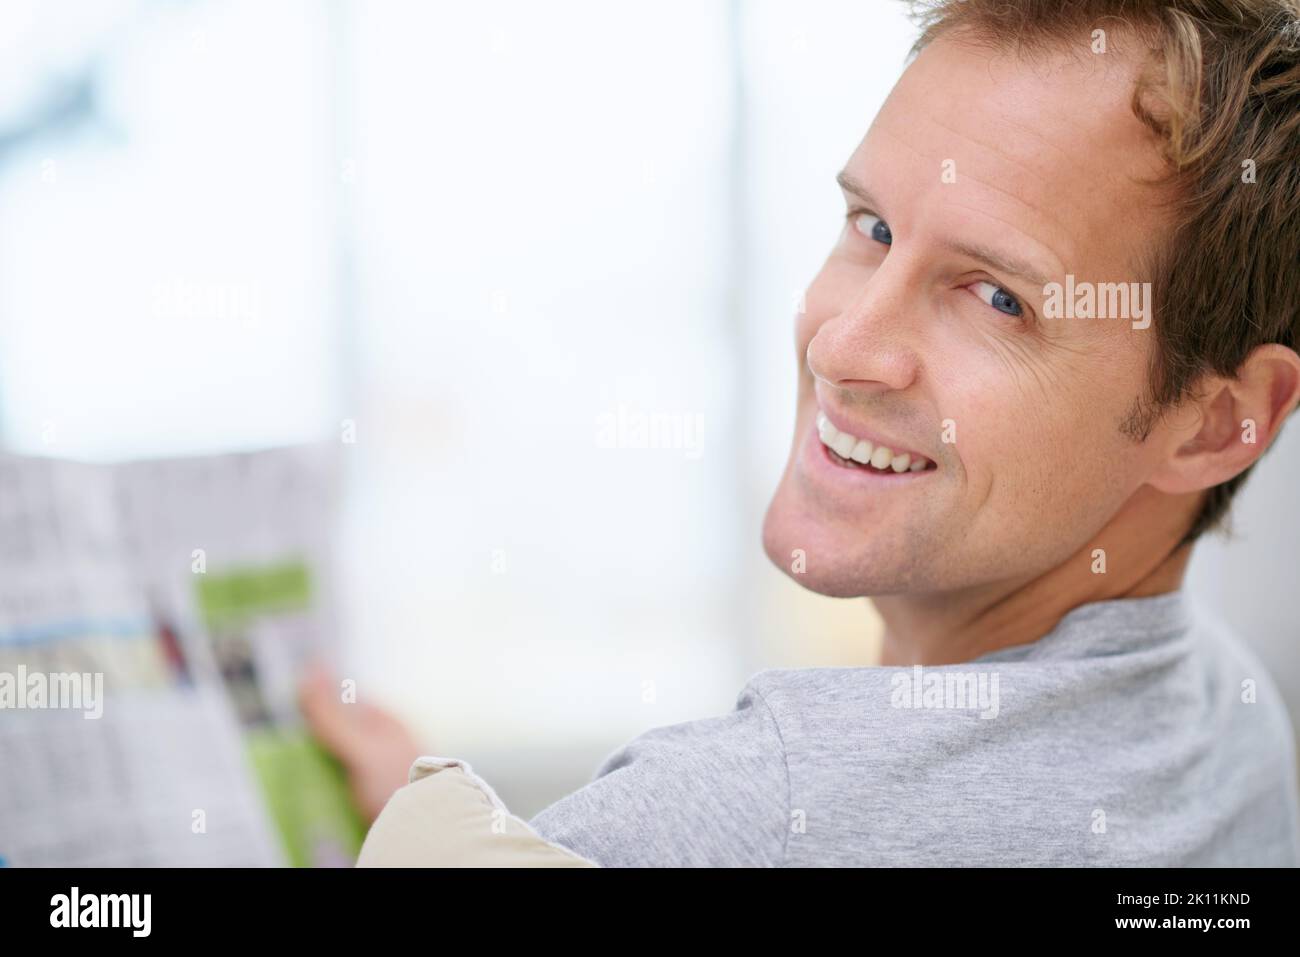 Getting his daily news. Portrait of a handsome man reading a newspaper at home. Stock Photo